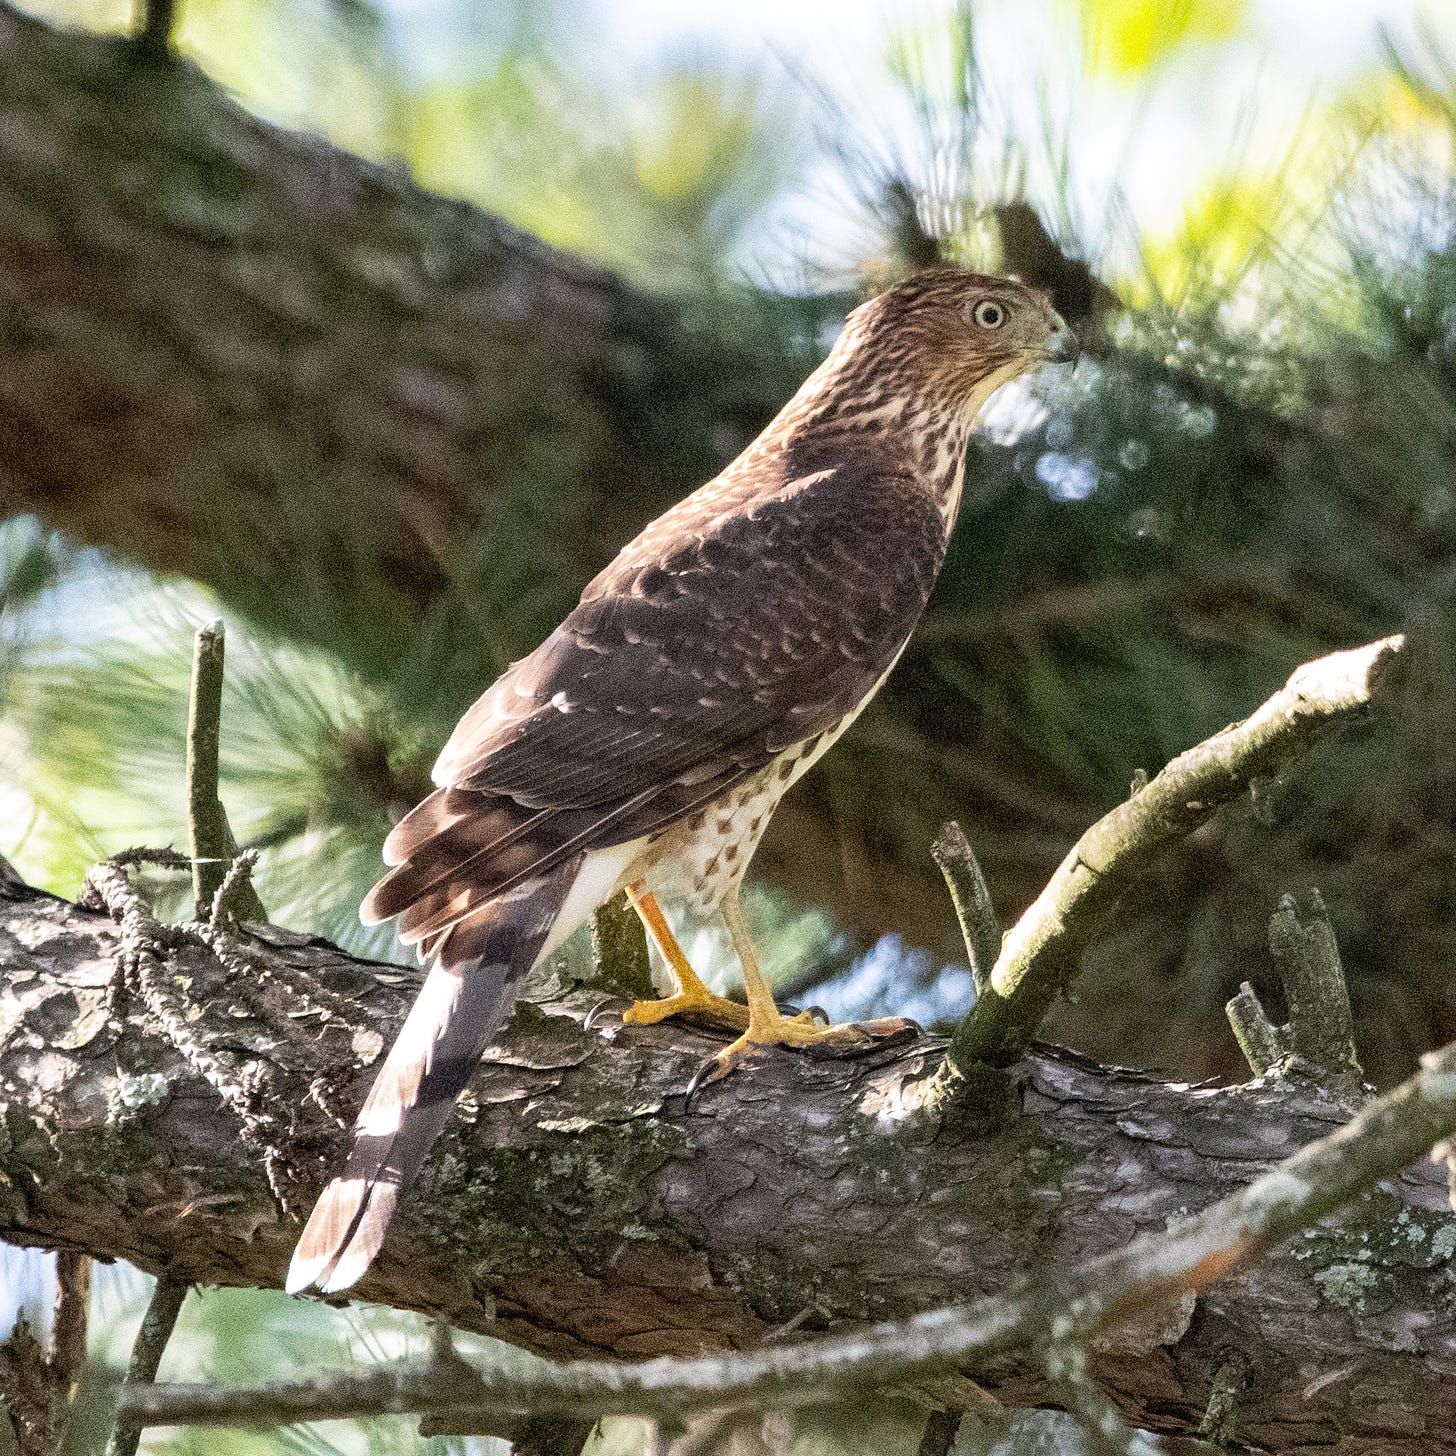 A juvenile Cooper's hawk with a lean and hungry look